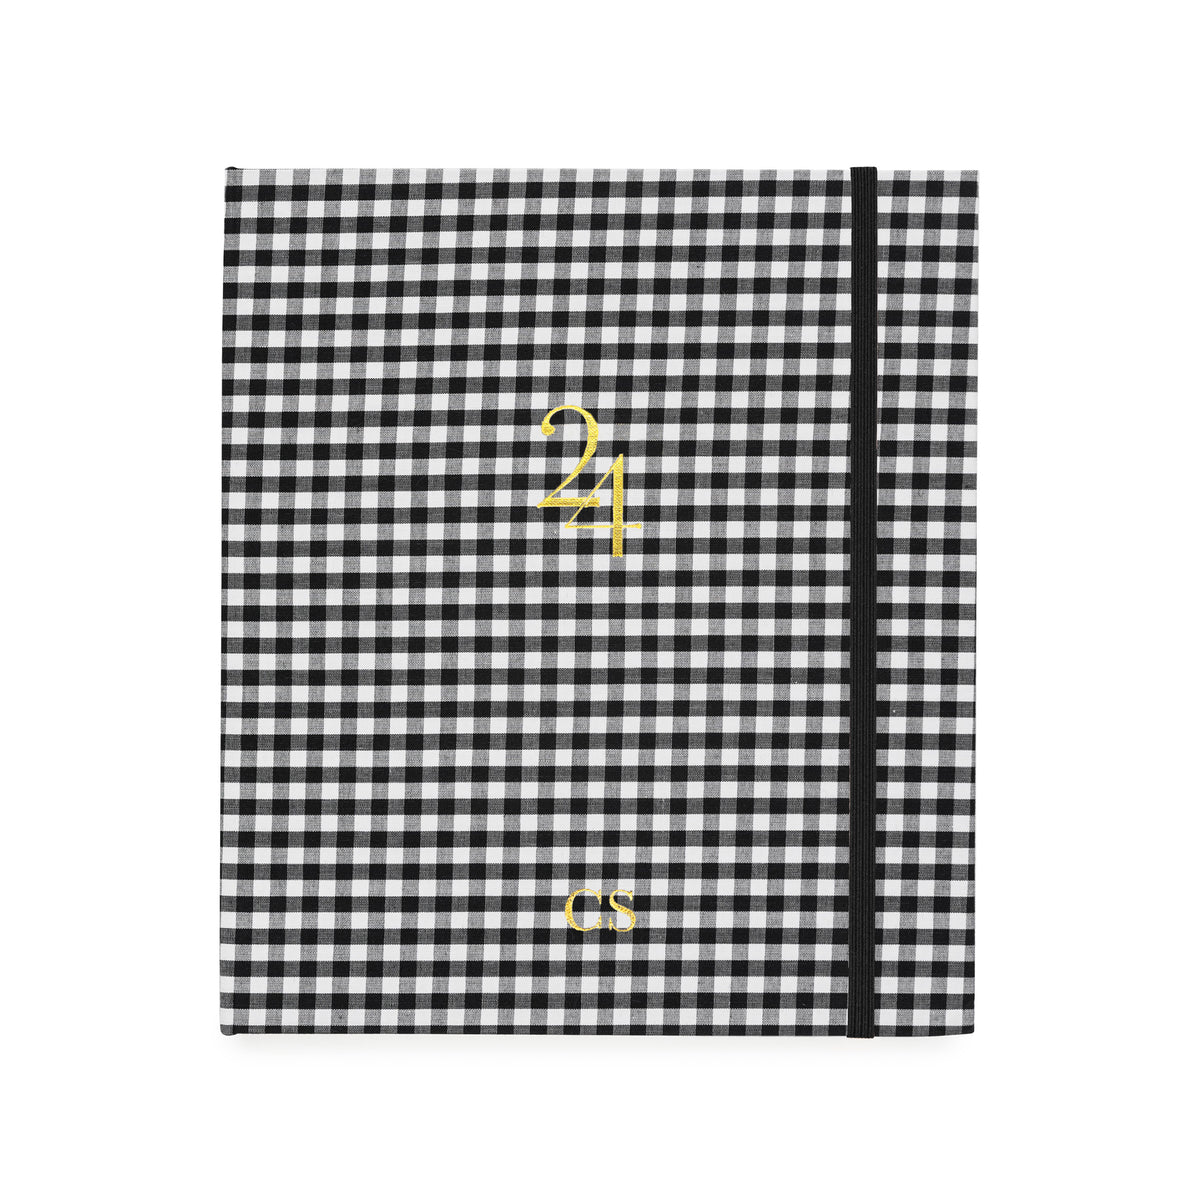 2024 Gingham concealed planner foil stamped with monogram initials